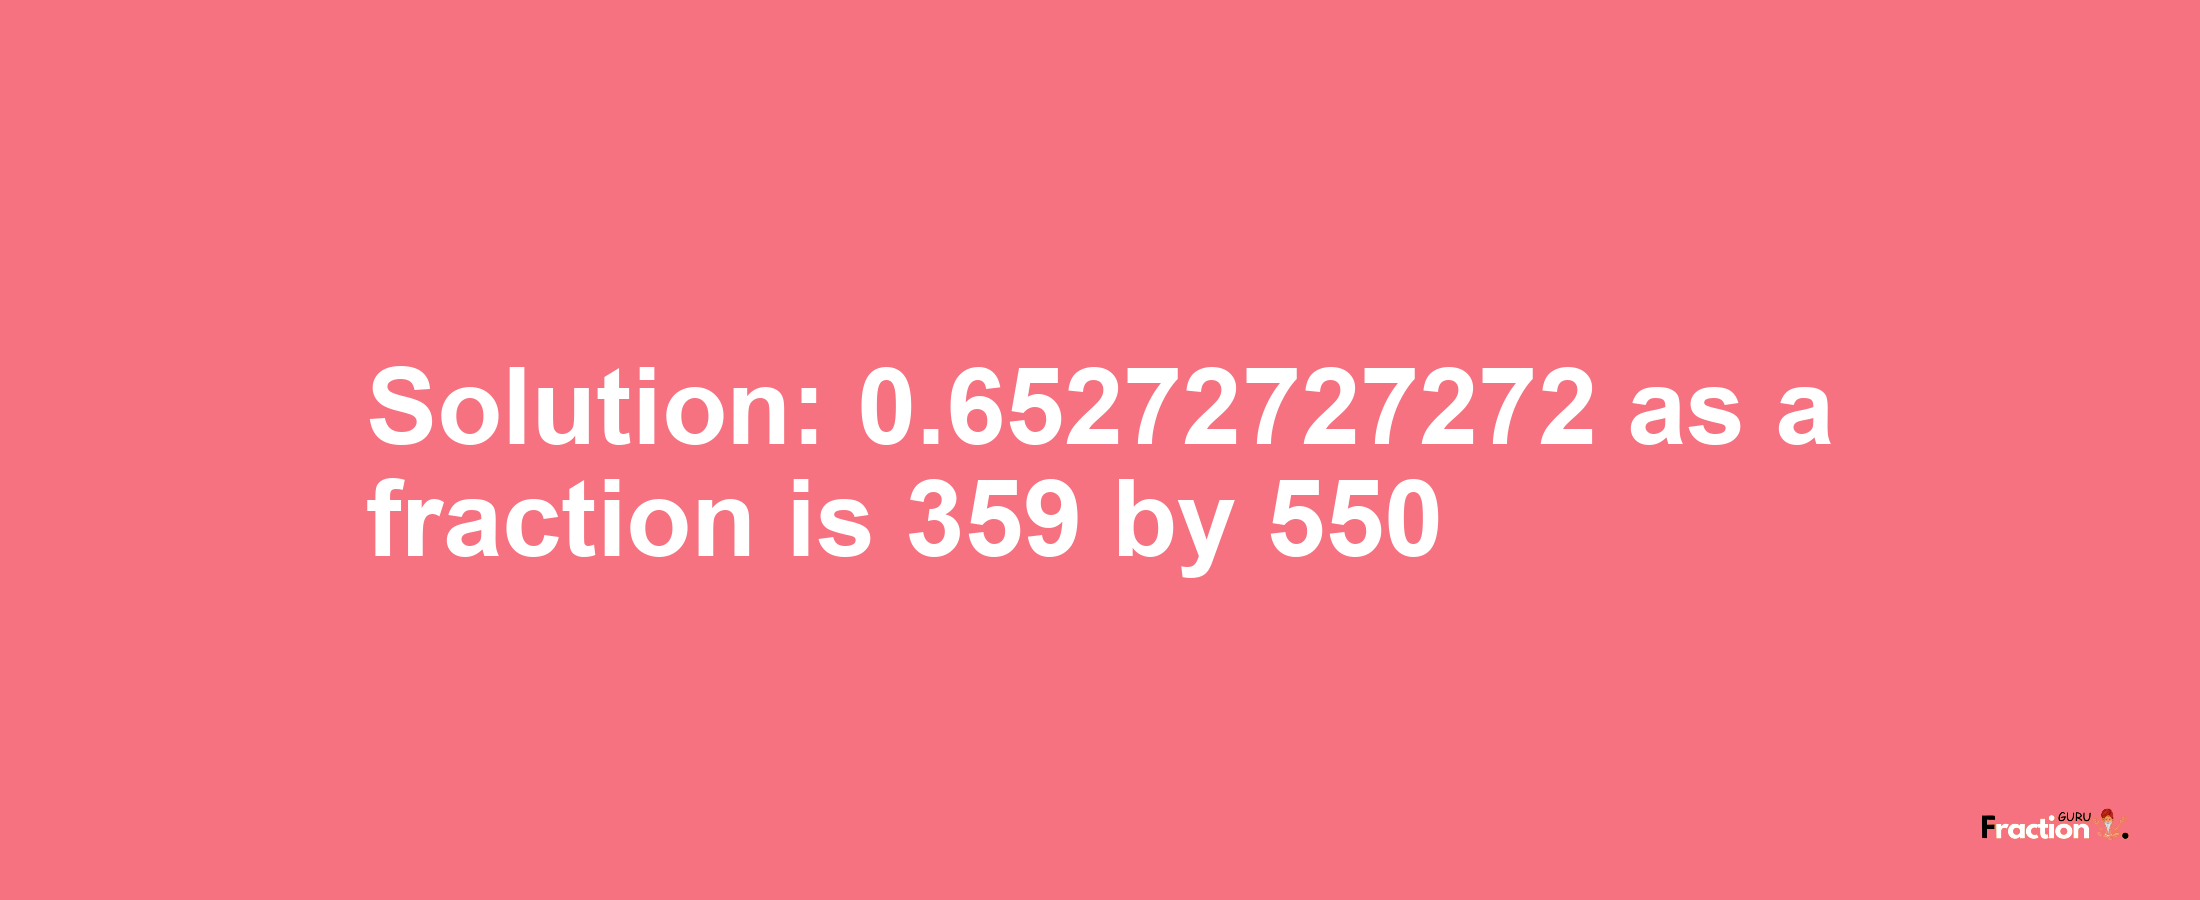 Solution:0.65272727272 as a fraction is 359/550